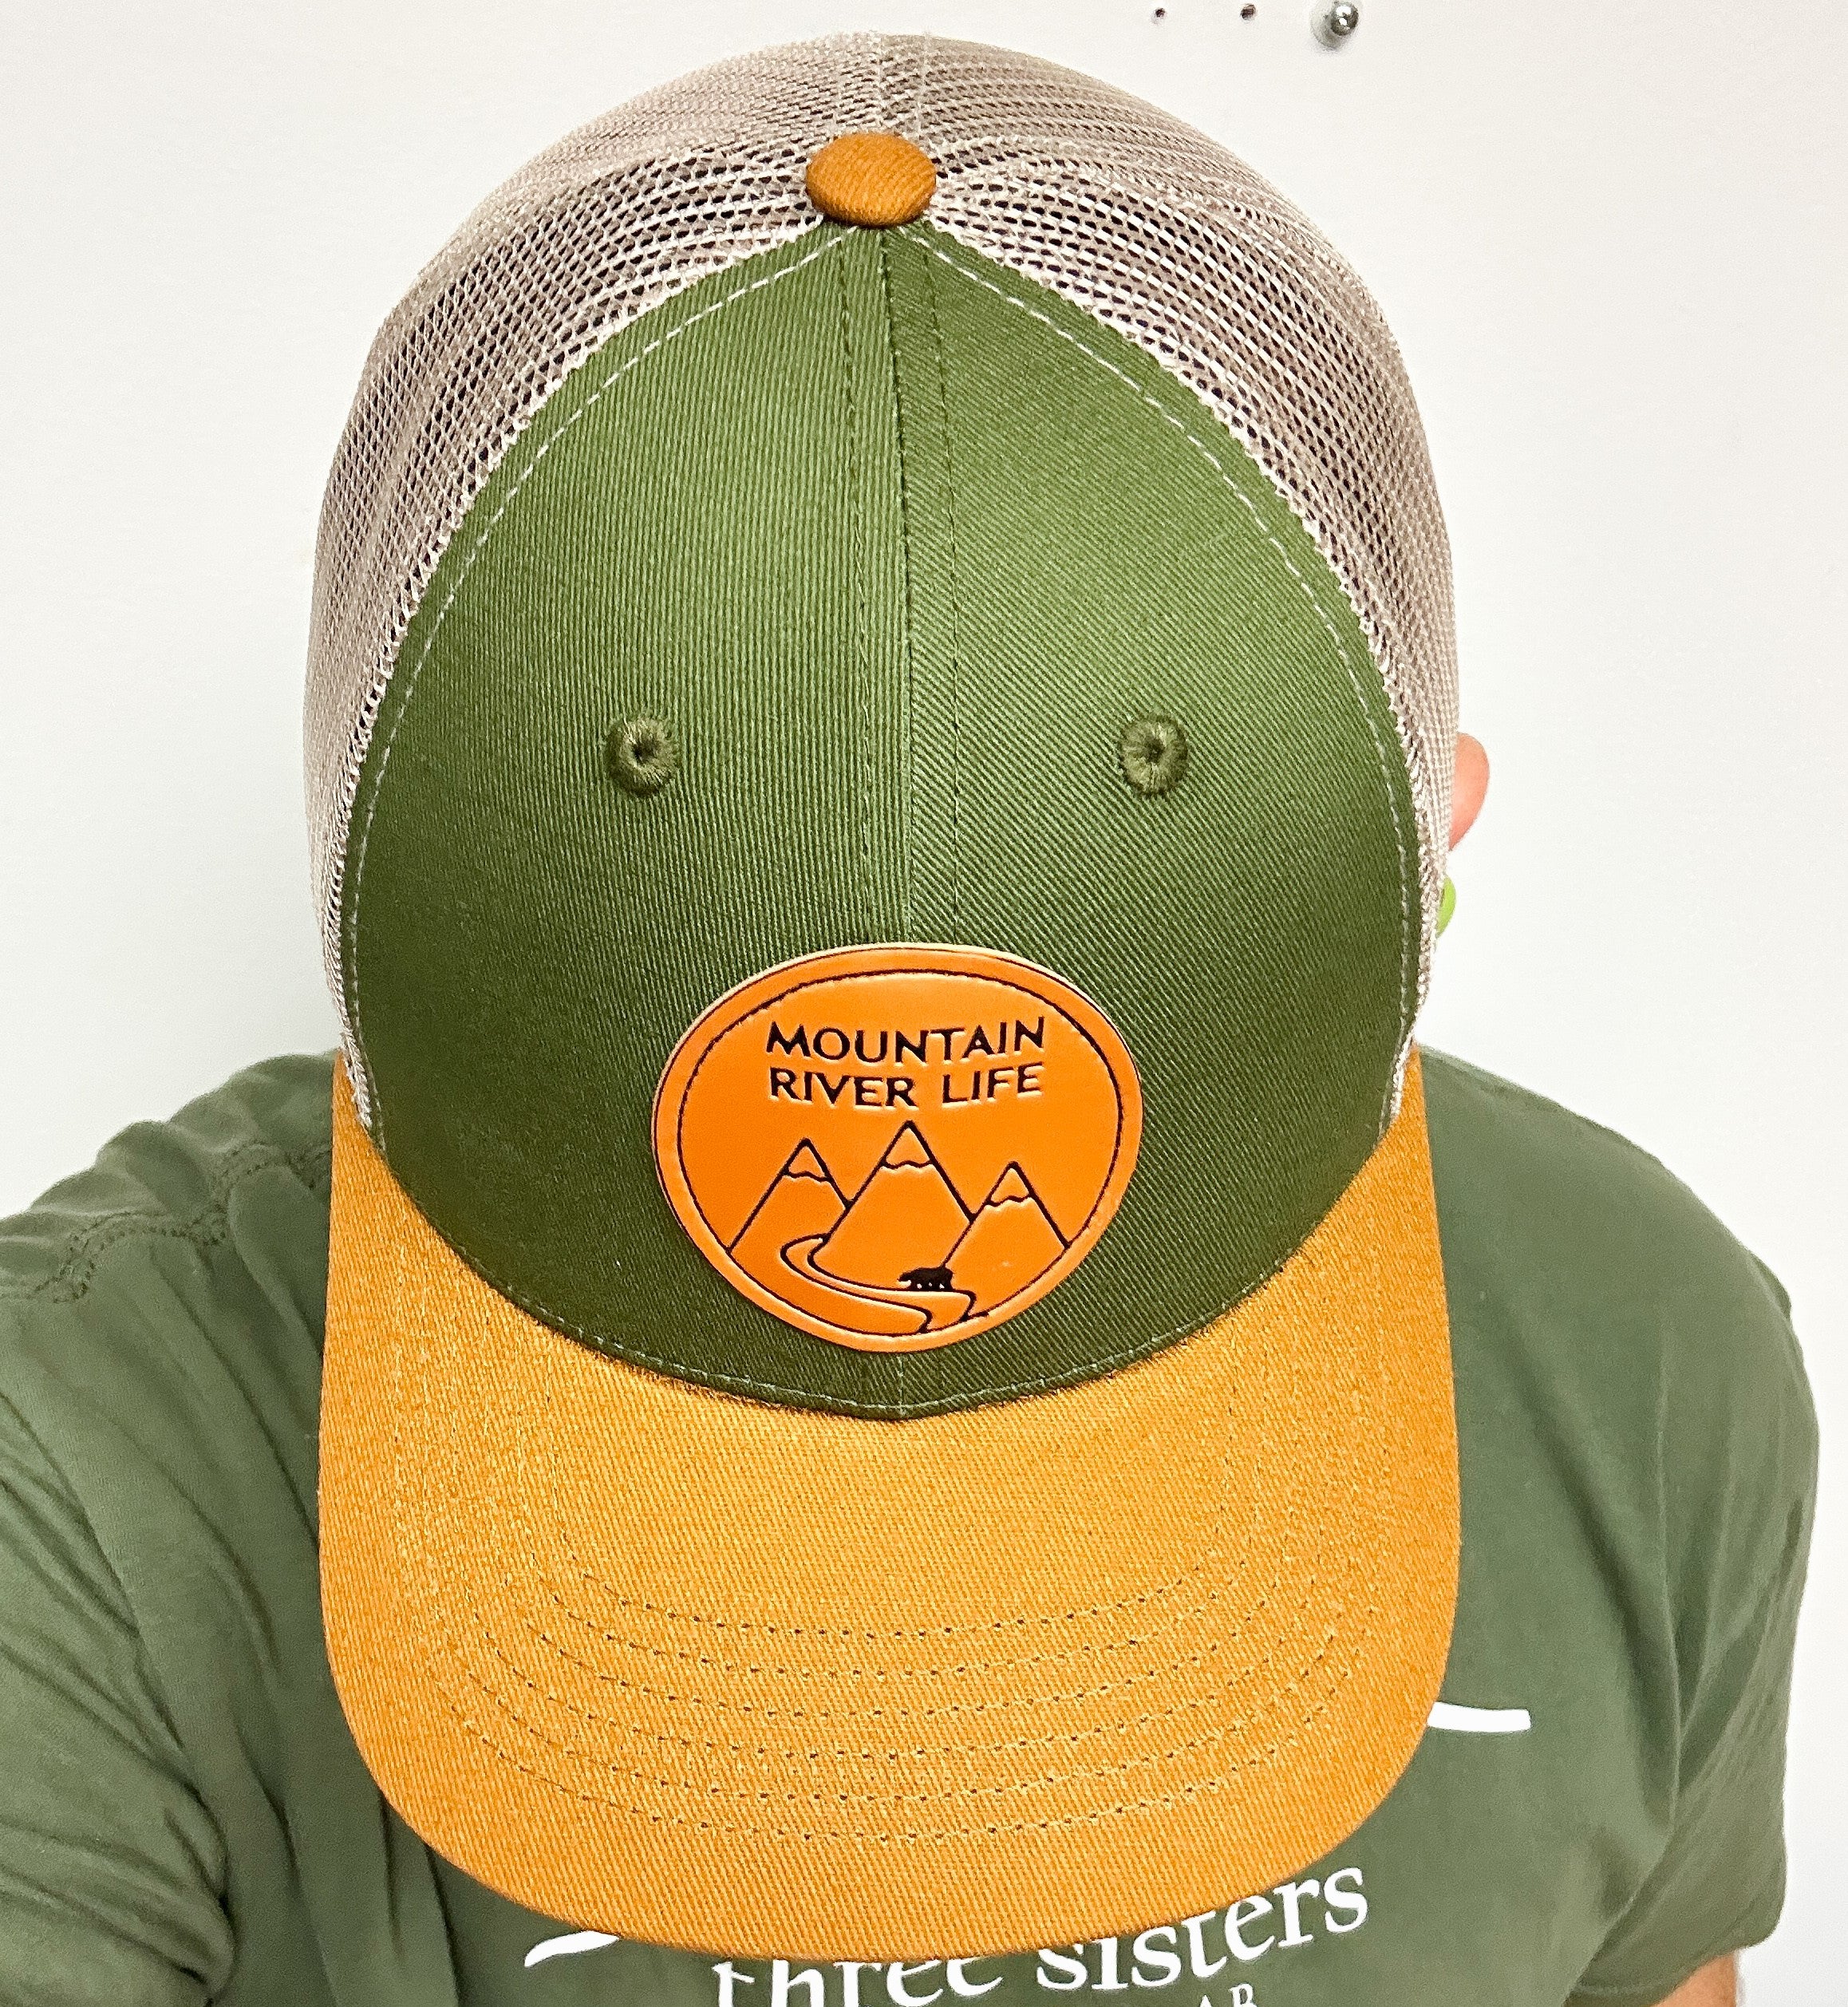 Mountain River Life Leather Patch Trucker Hats